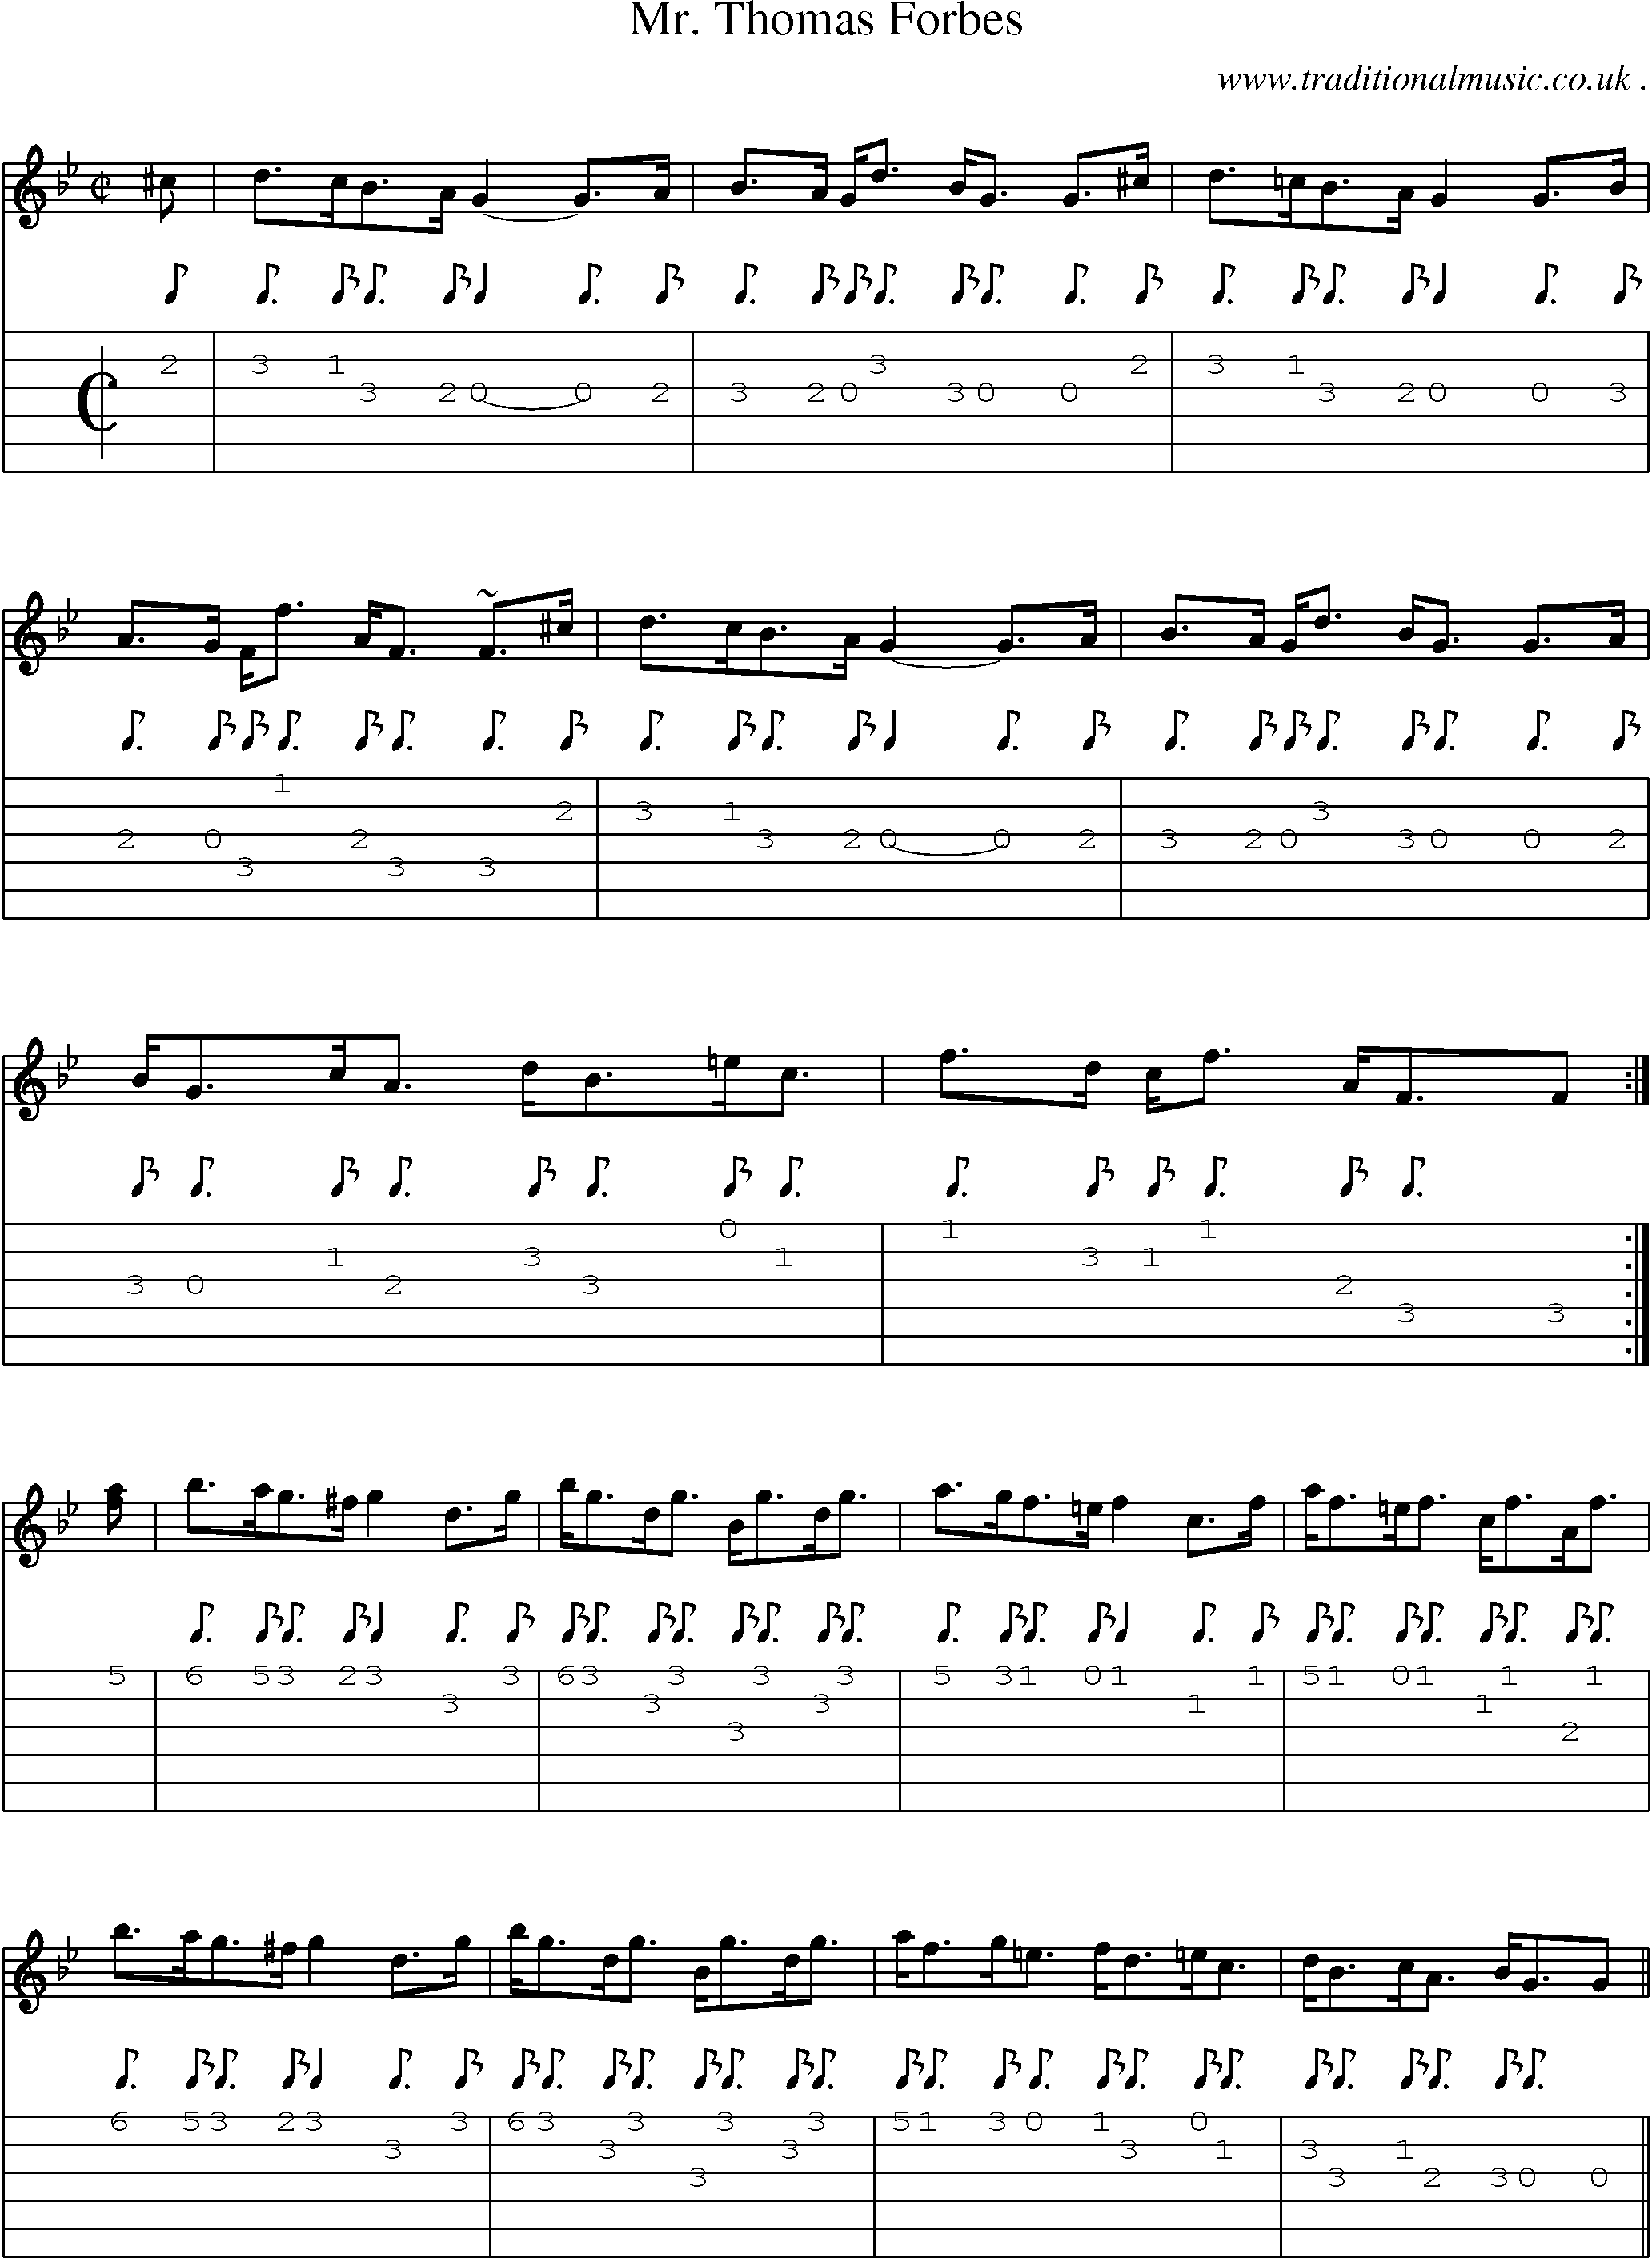 Sheet-music  score, Chords and Guitar Tabs for Mr Thomas Forbes